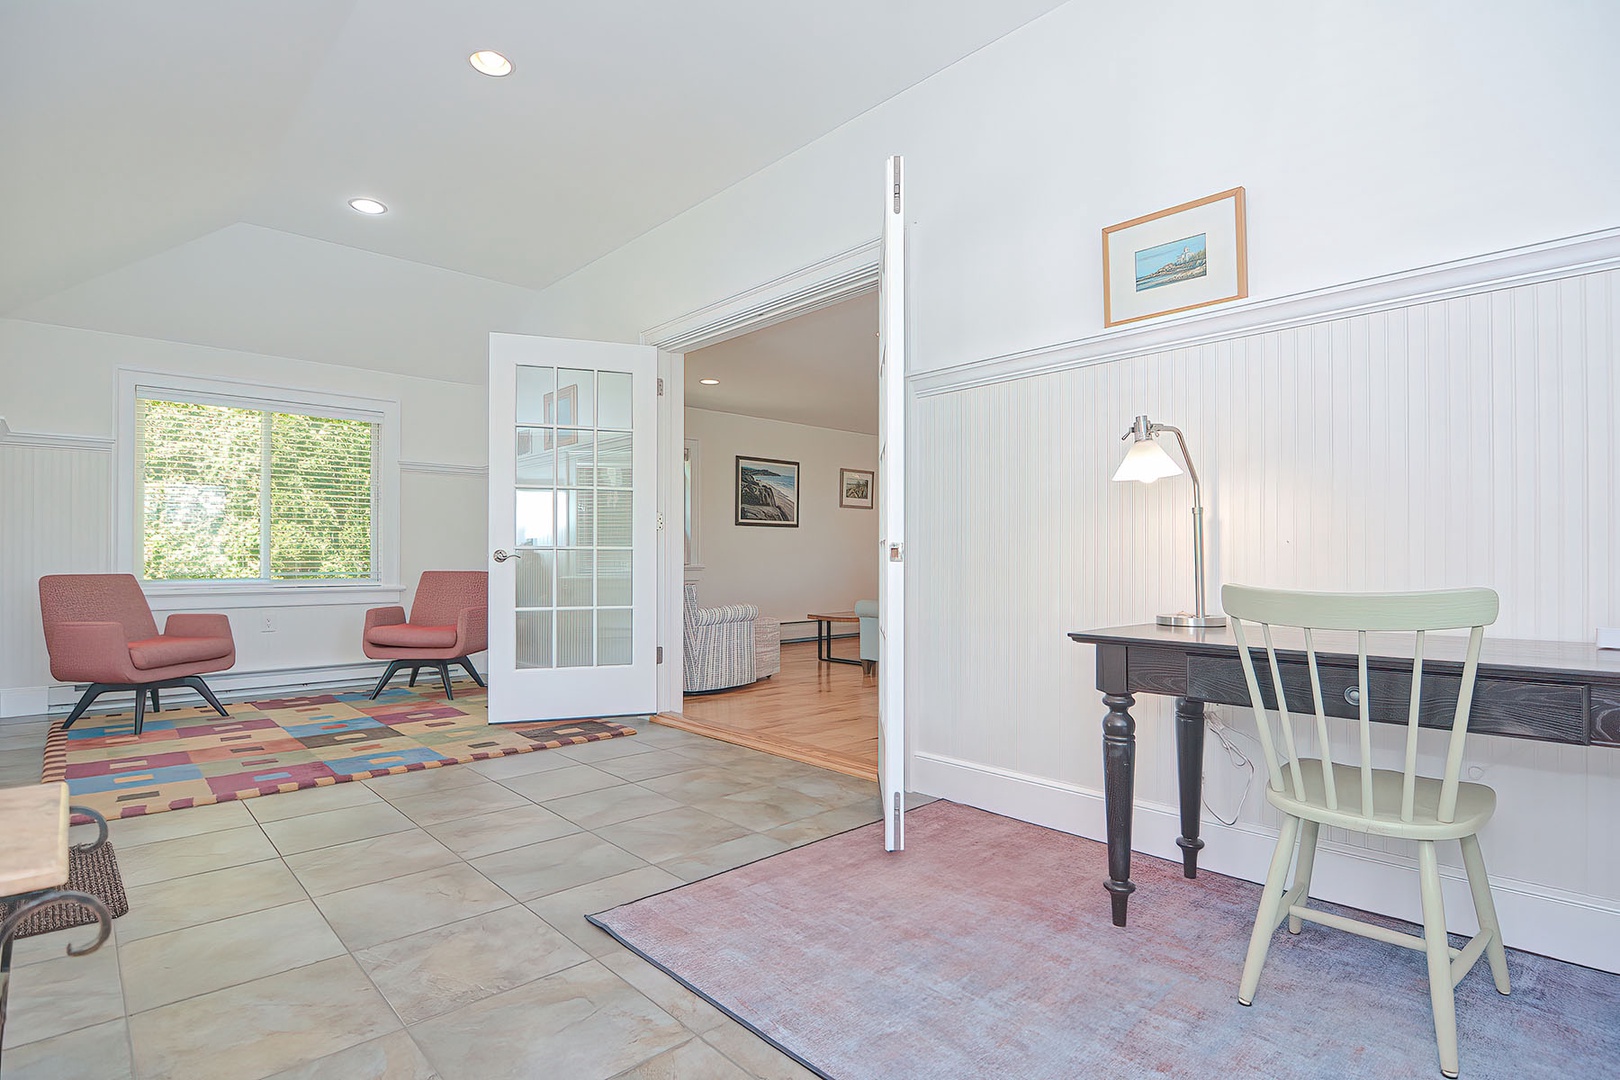 Enter into a front hall with both sitting and working areas.